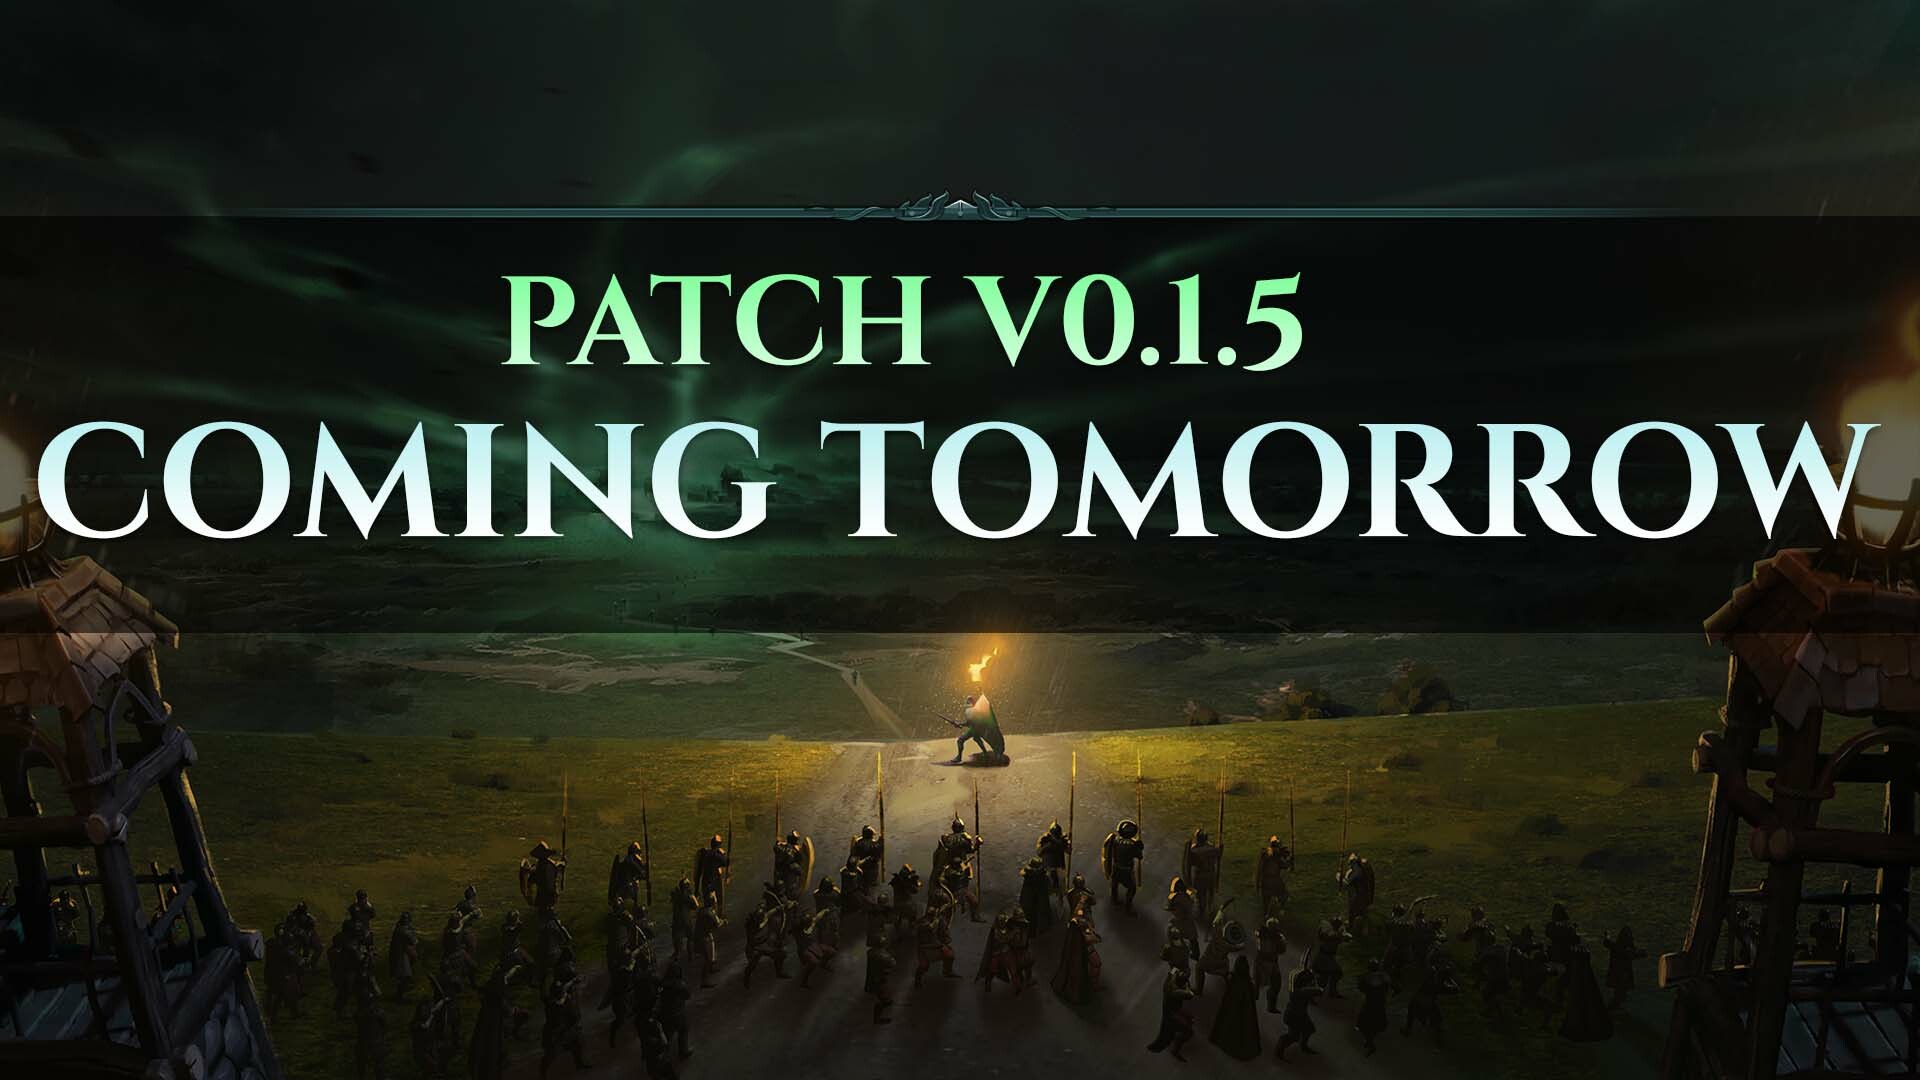 More details for tomorrow's update from the patch note on WeChat